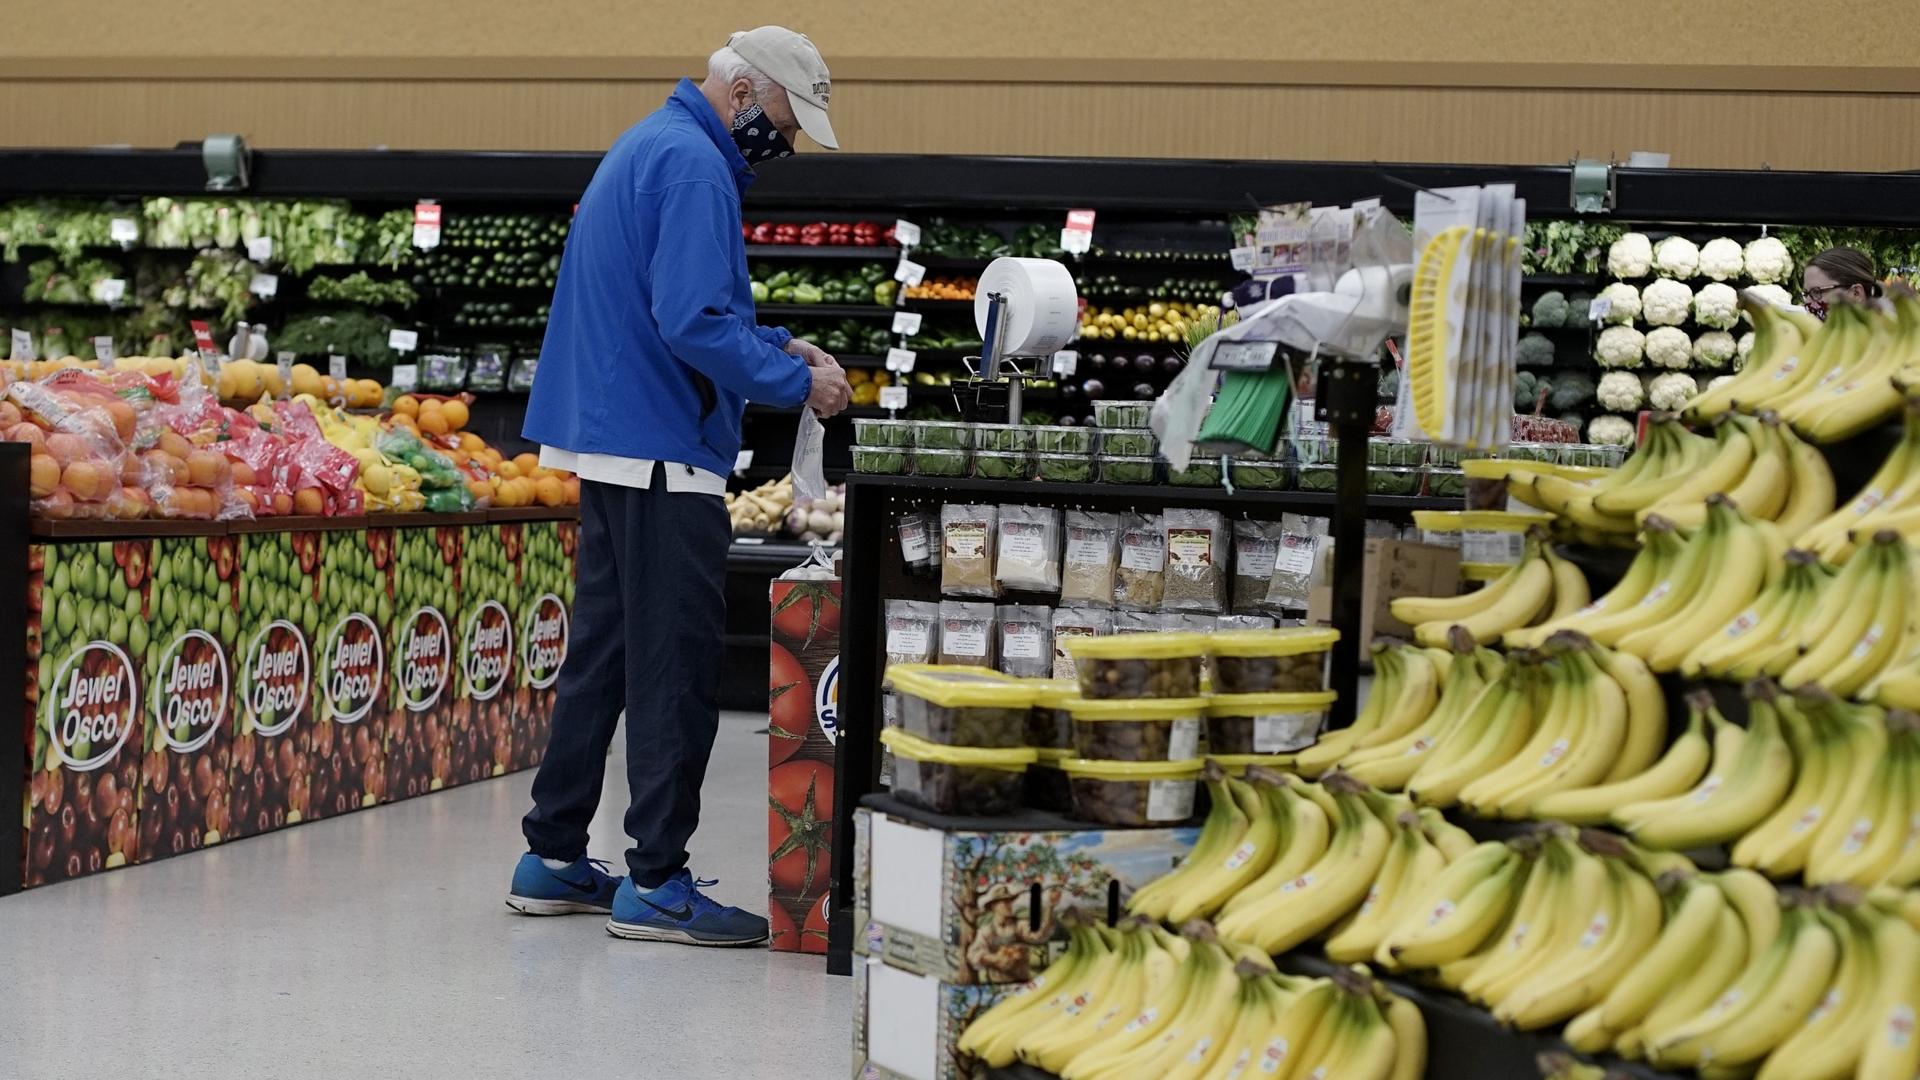 Man shopping in the produce section of an American grocery store